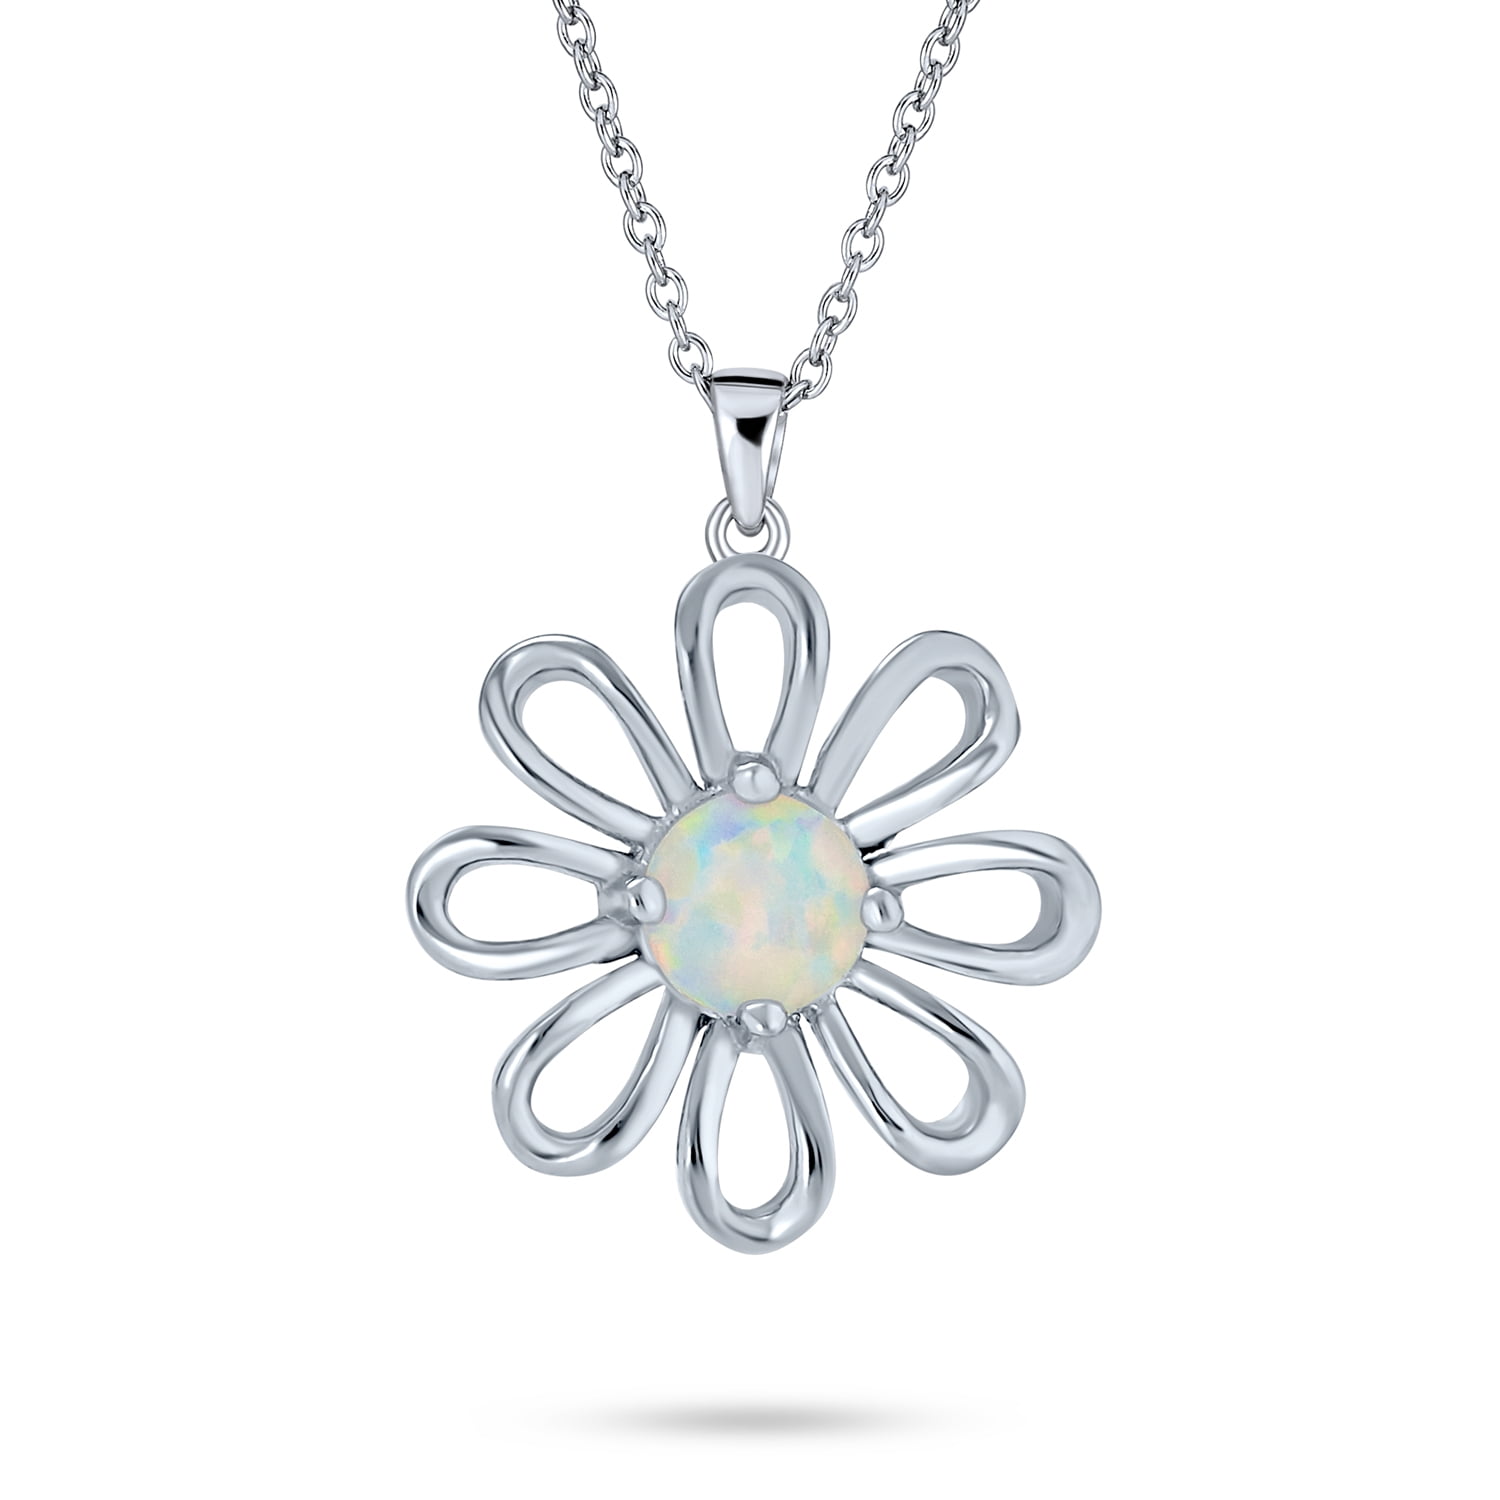 925 Sterling Silver Plated Daisy Flower Charm Pendant Necklace 18"